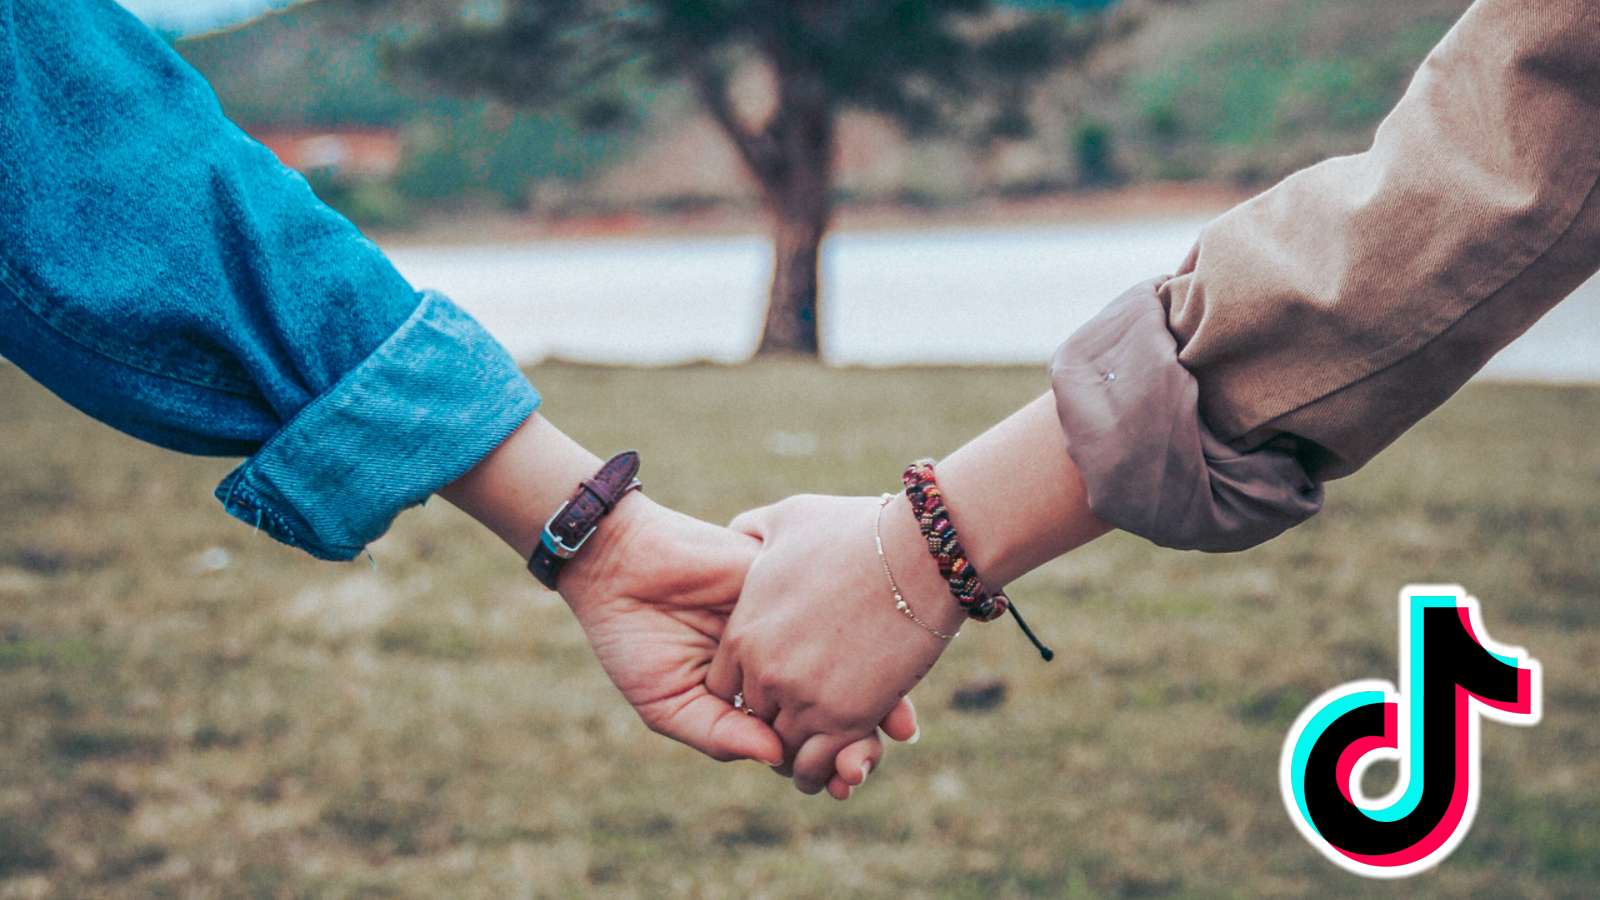 Two people holding hands next to TikTok logo